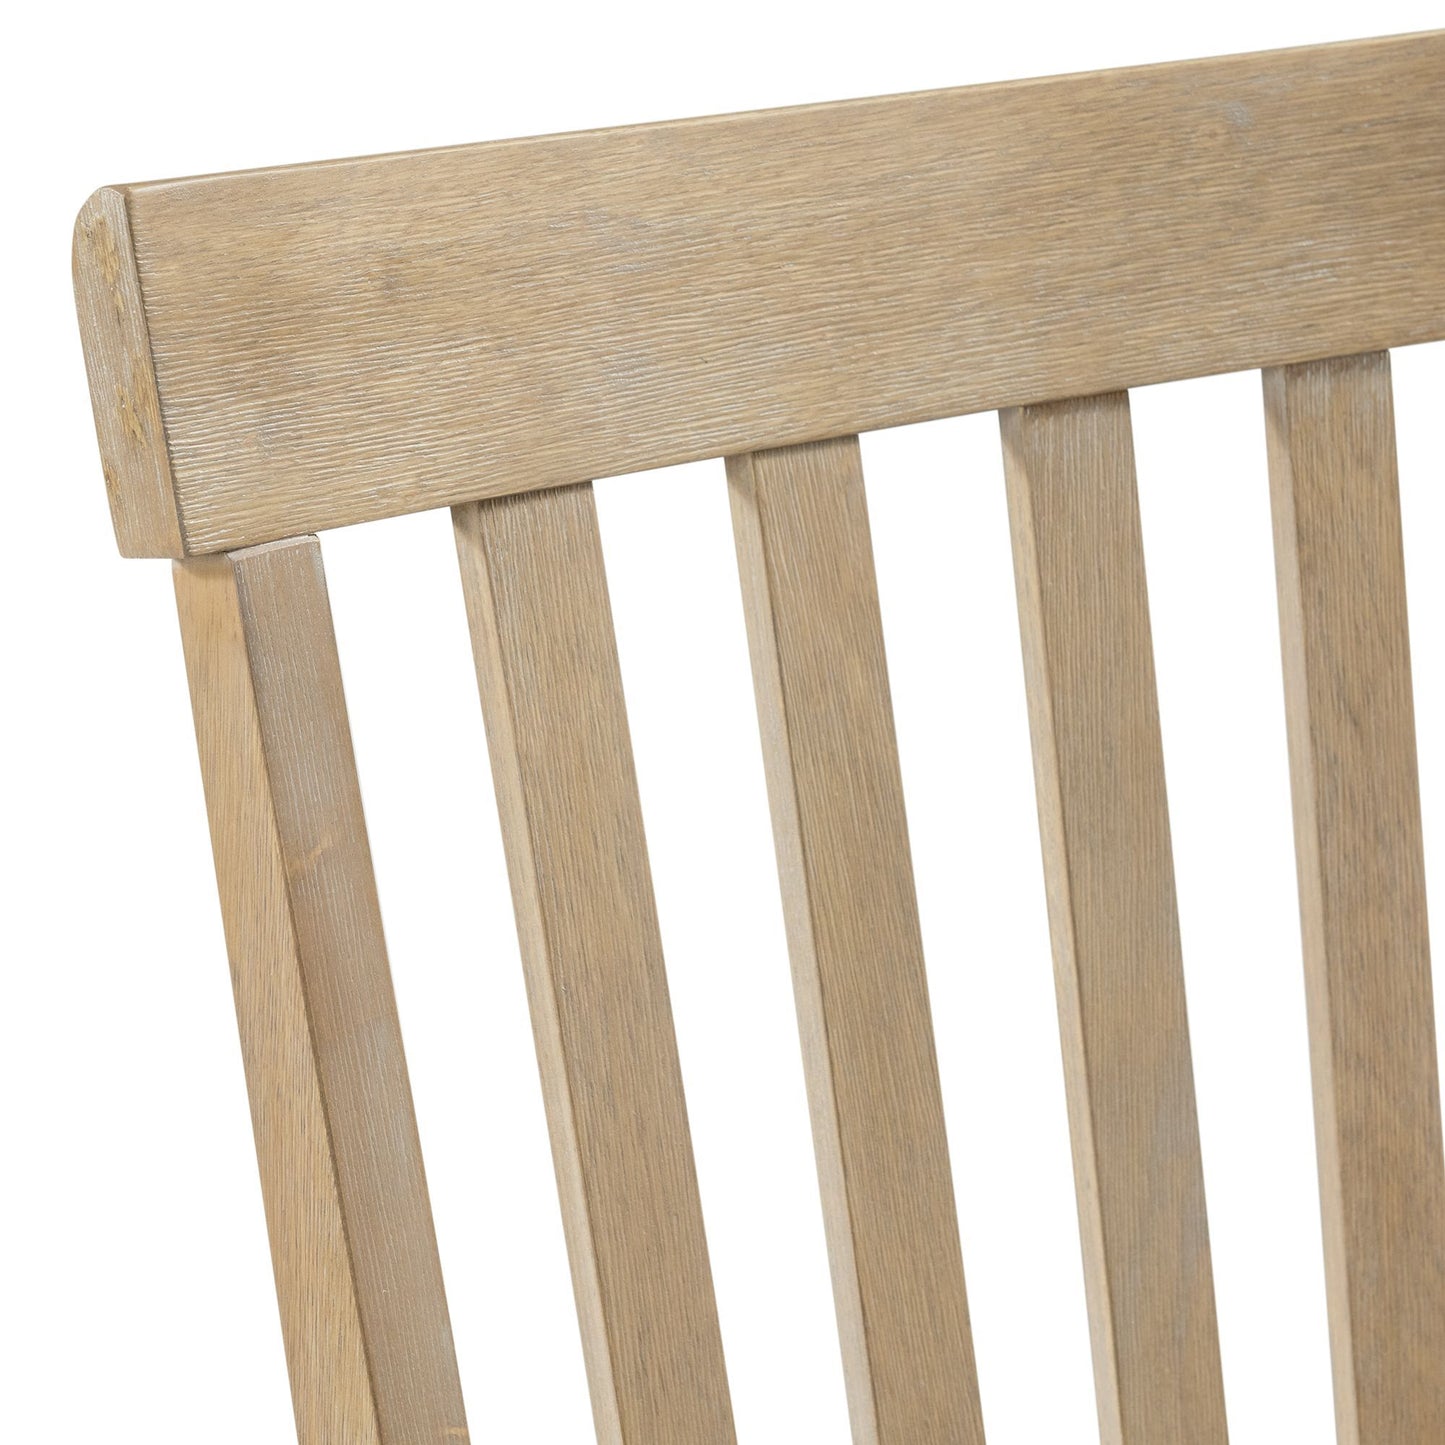 Lakeview - Slat Back Side Chair (Set of 2) - Natural Finish